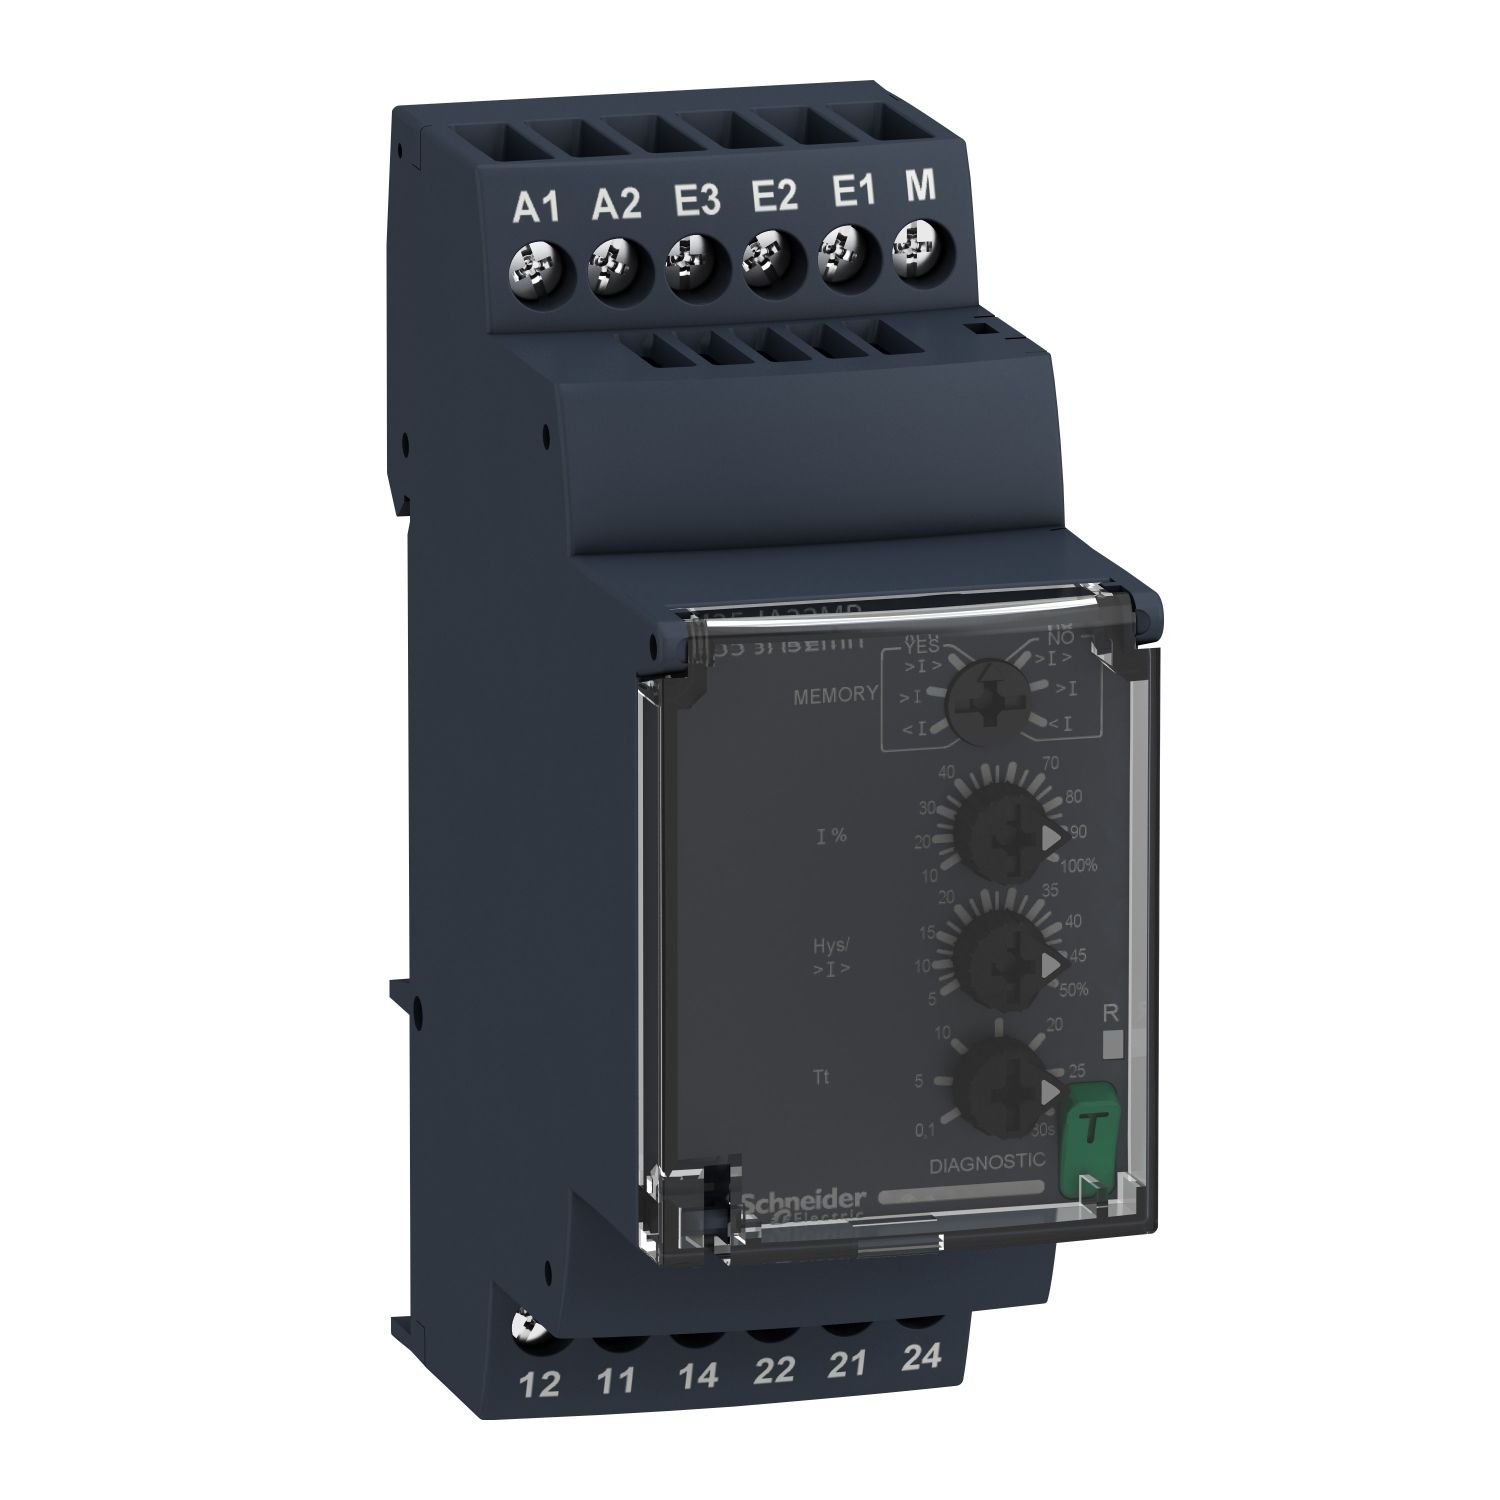 RM35JA32MR current control relay, Harmony Control Relays, 5A, 2CO, 0.15…15A, 24…240V AC DC